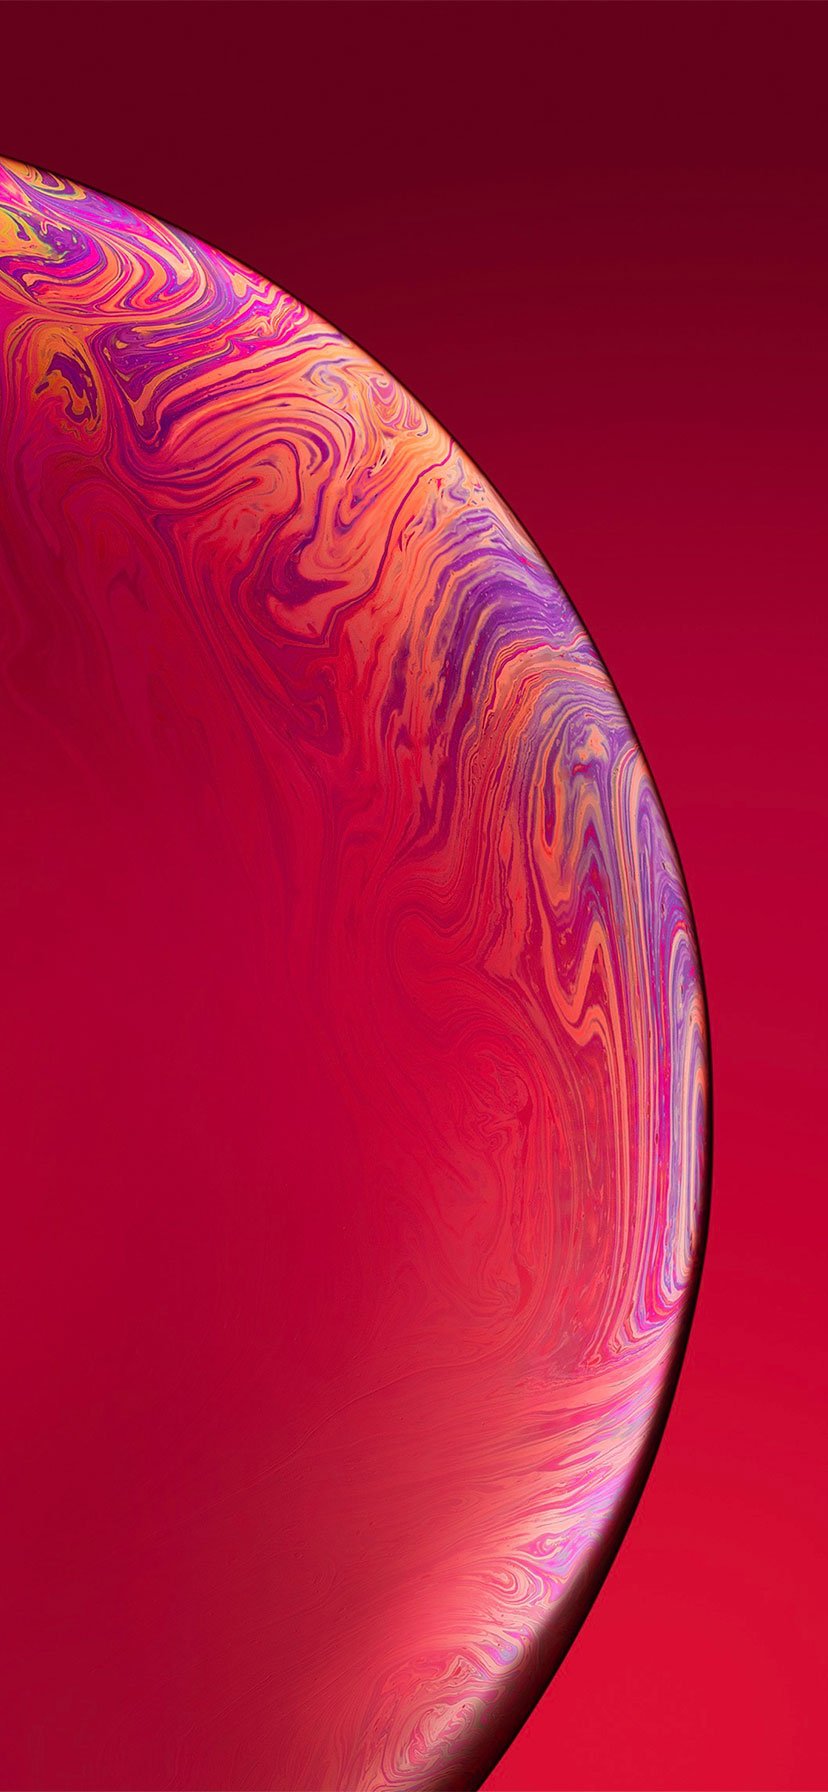 50 Best High Quality iPhone XR Wallpapers  Backgrounds